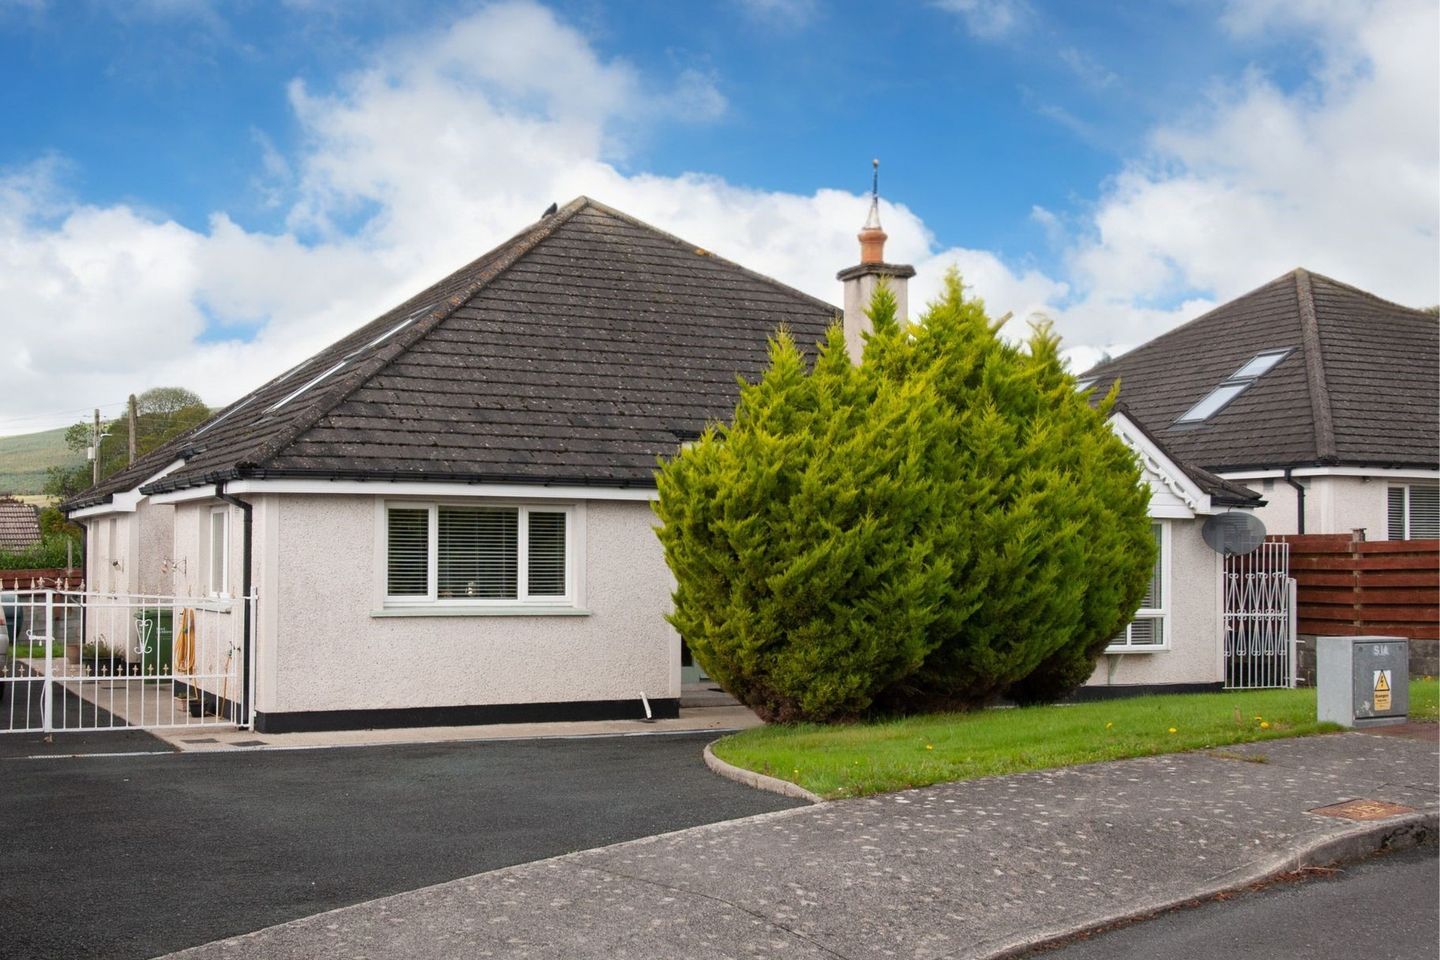 21 Holt Crescent, Lugduff, Tinahely, Co. Wicklow, Y14F832